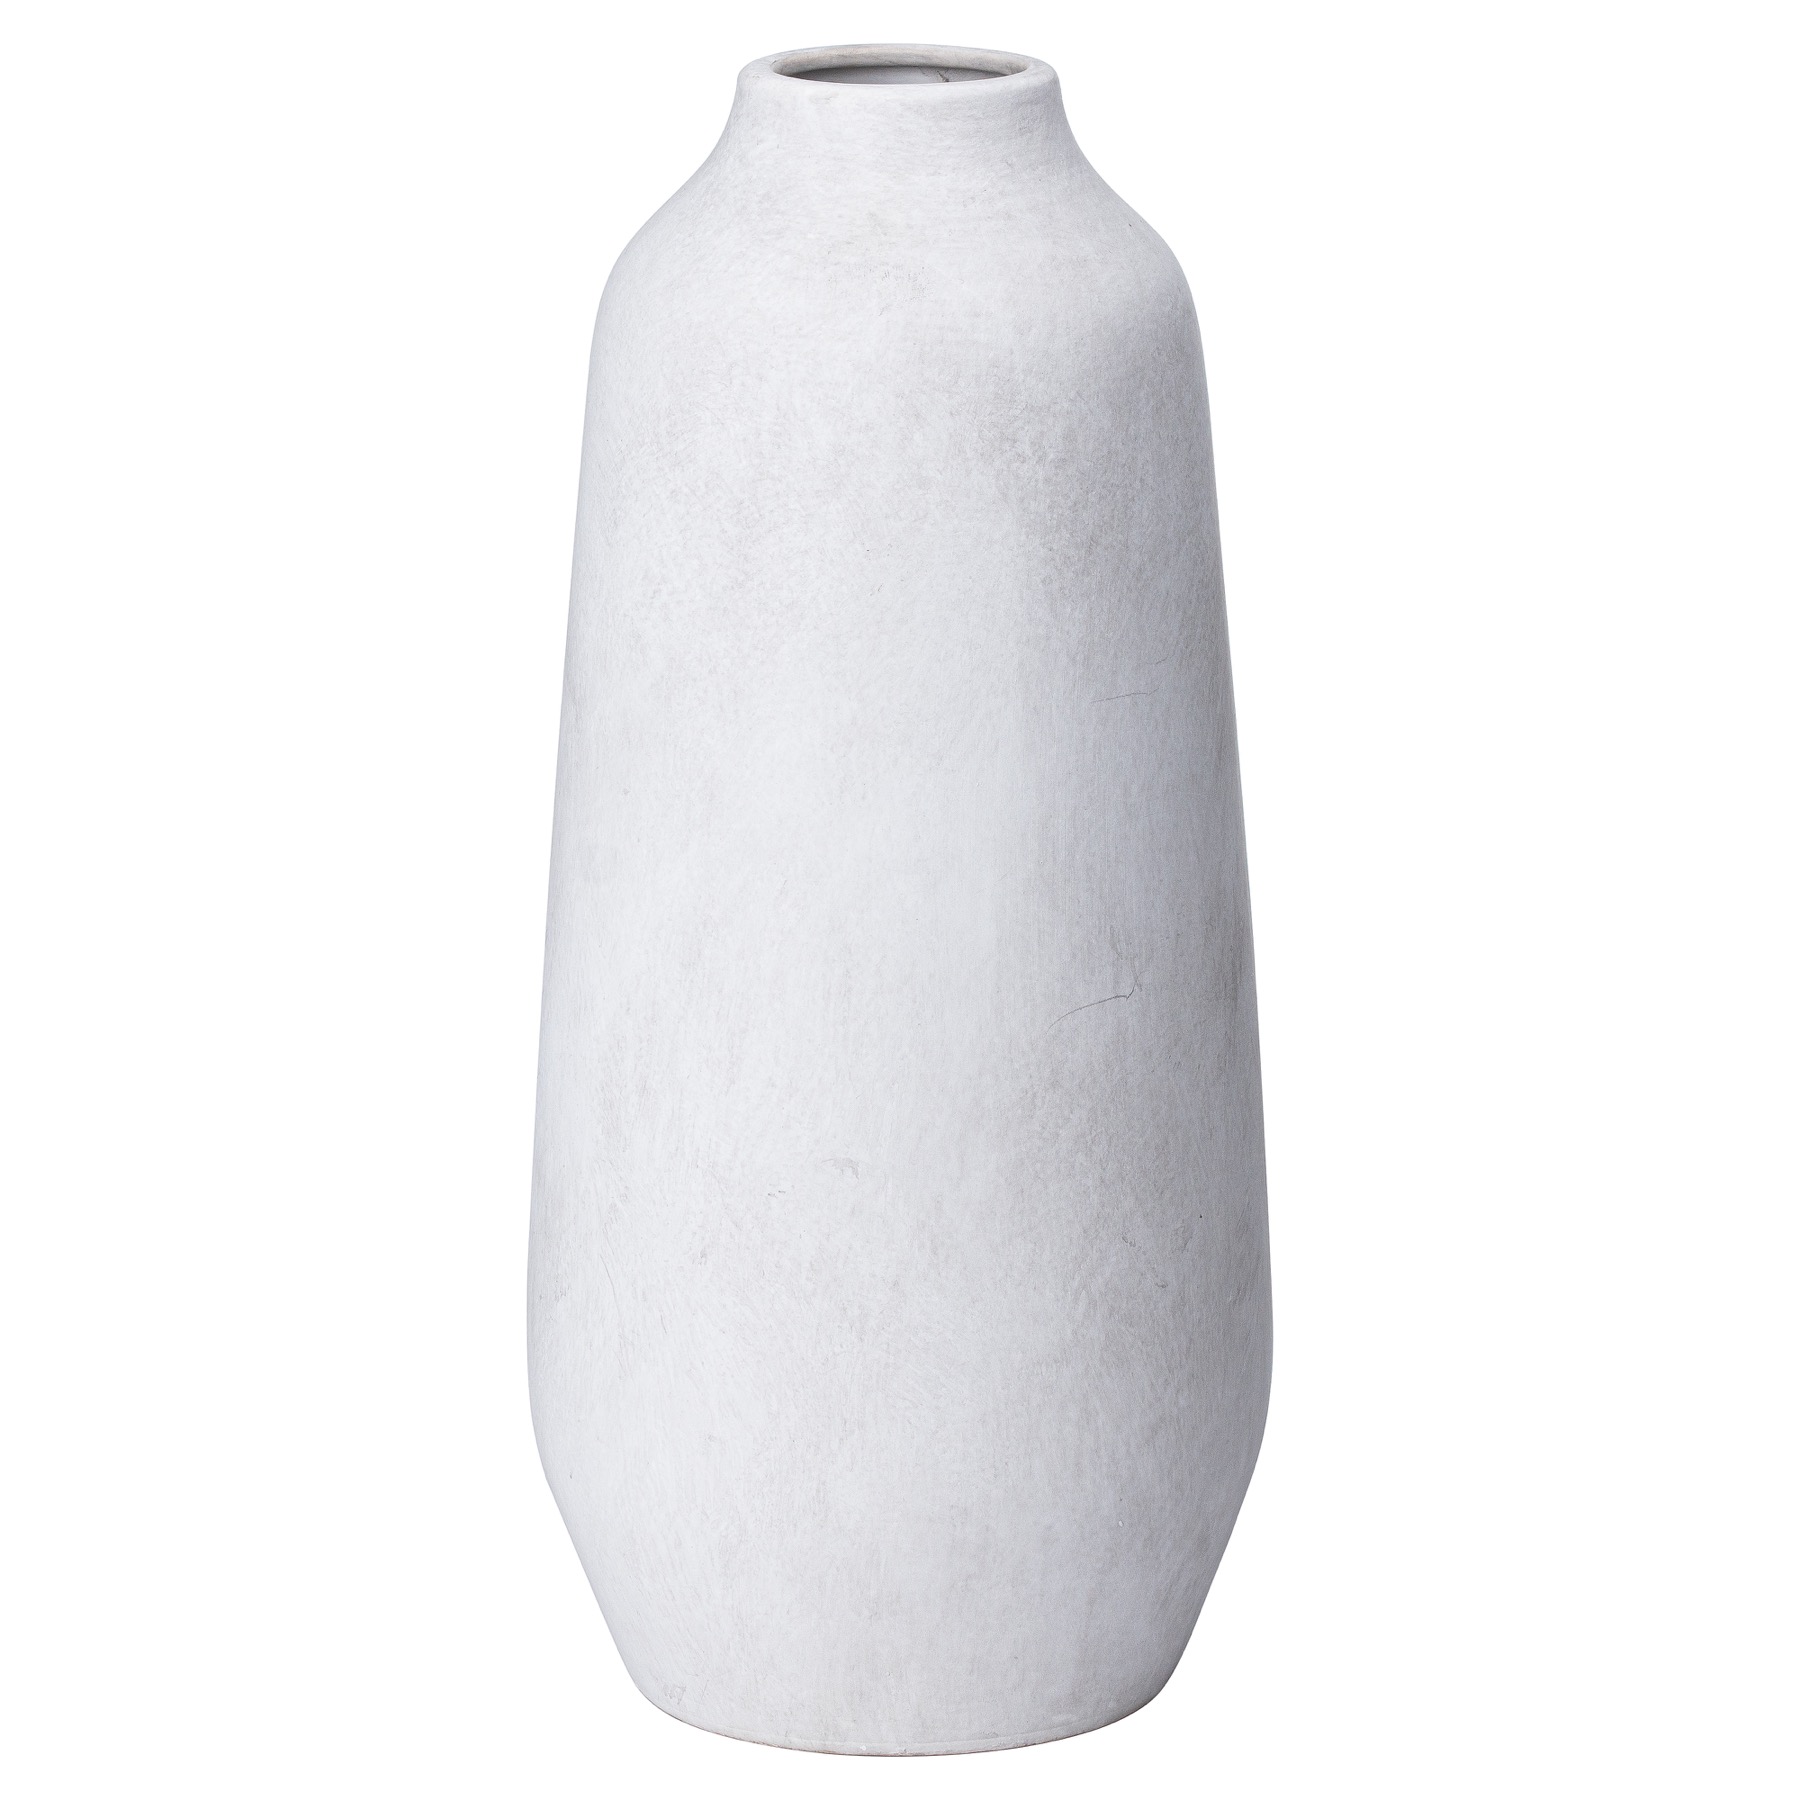 Darcy Ople Tall Vase - Image 1